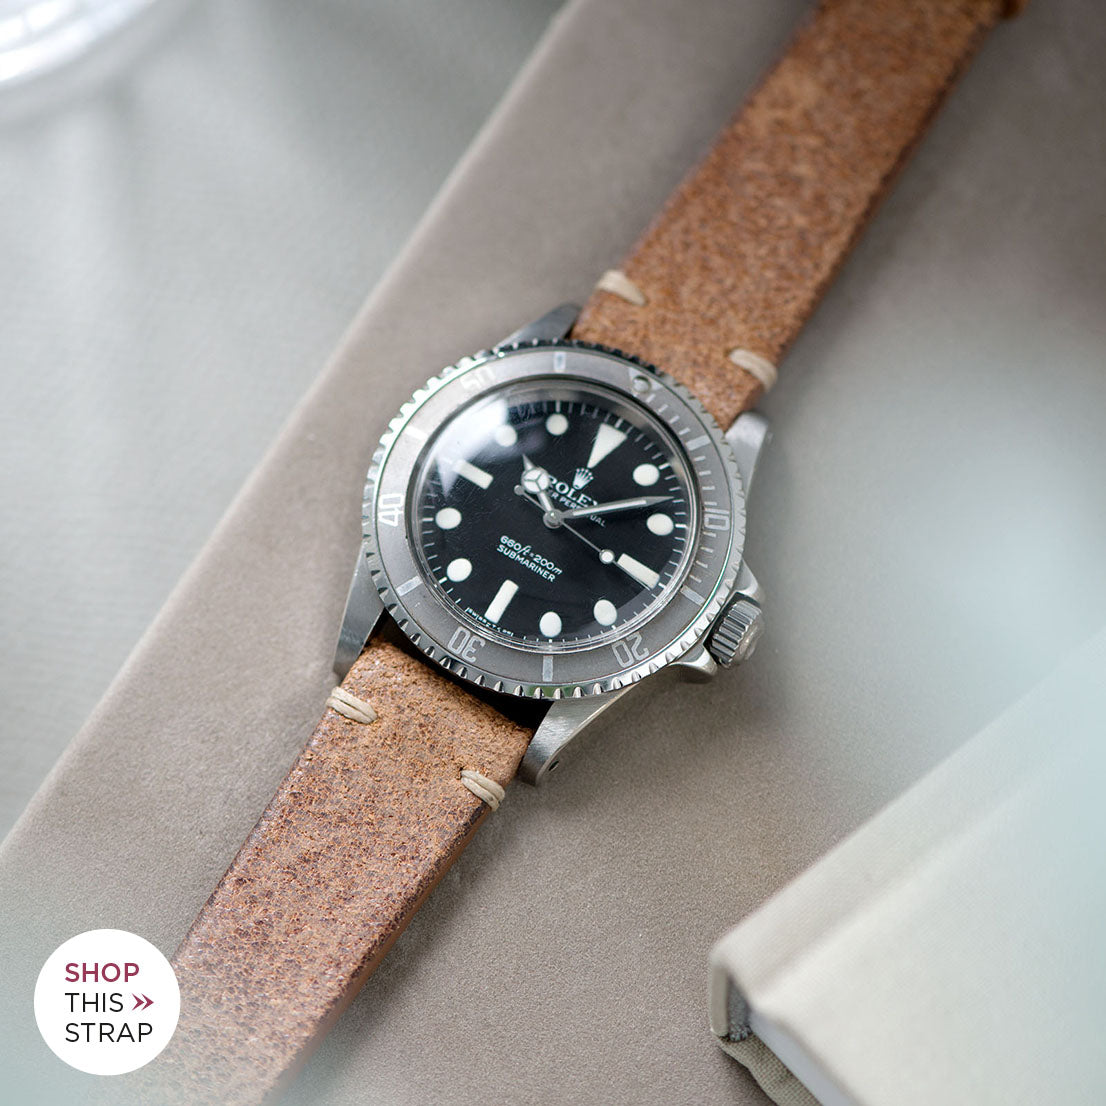 Bulang and Sons_Strap Guide_The Rolex 5513 Faded Maxi Submariner_ Crackle Brown Leather Watch Strap